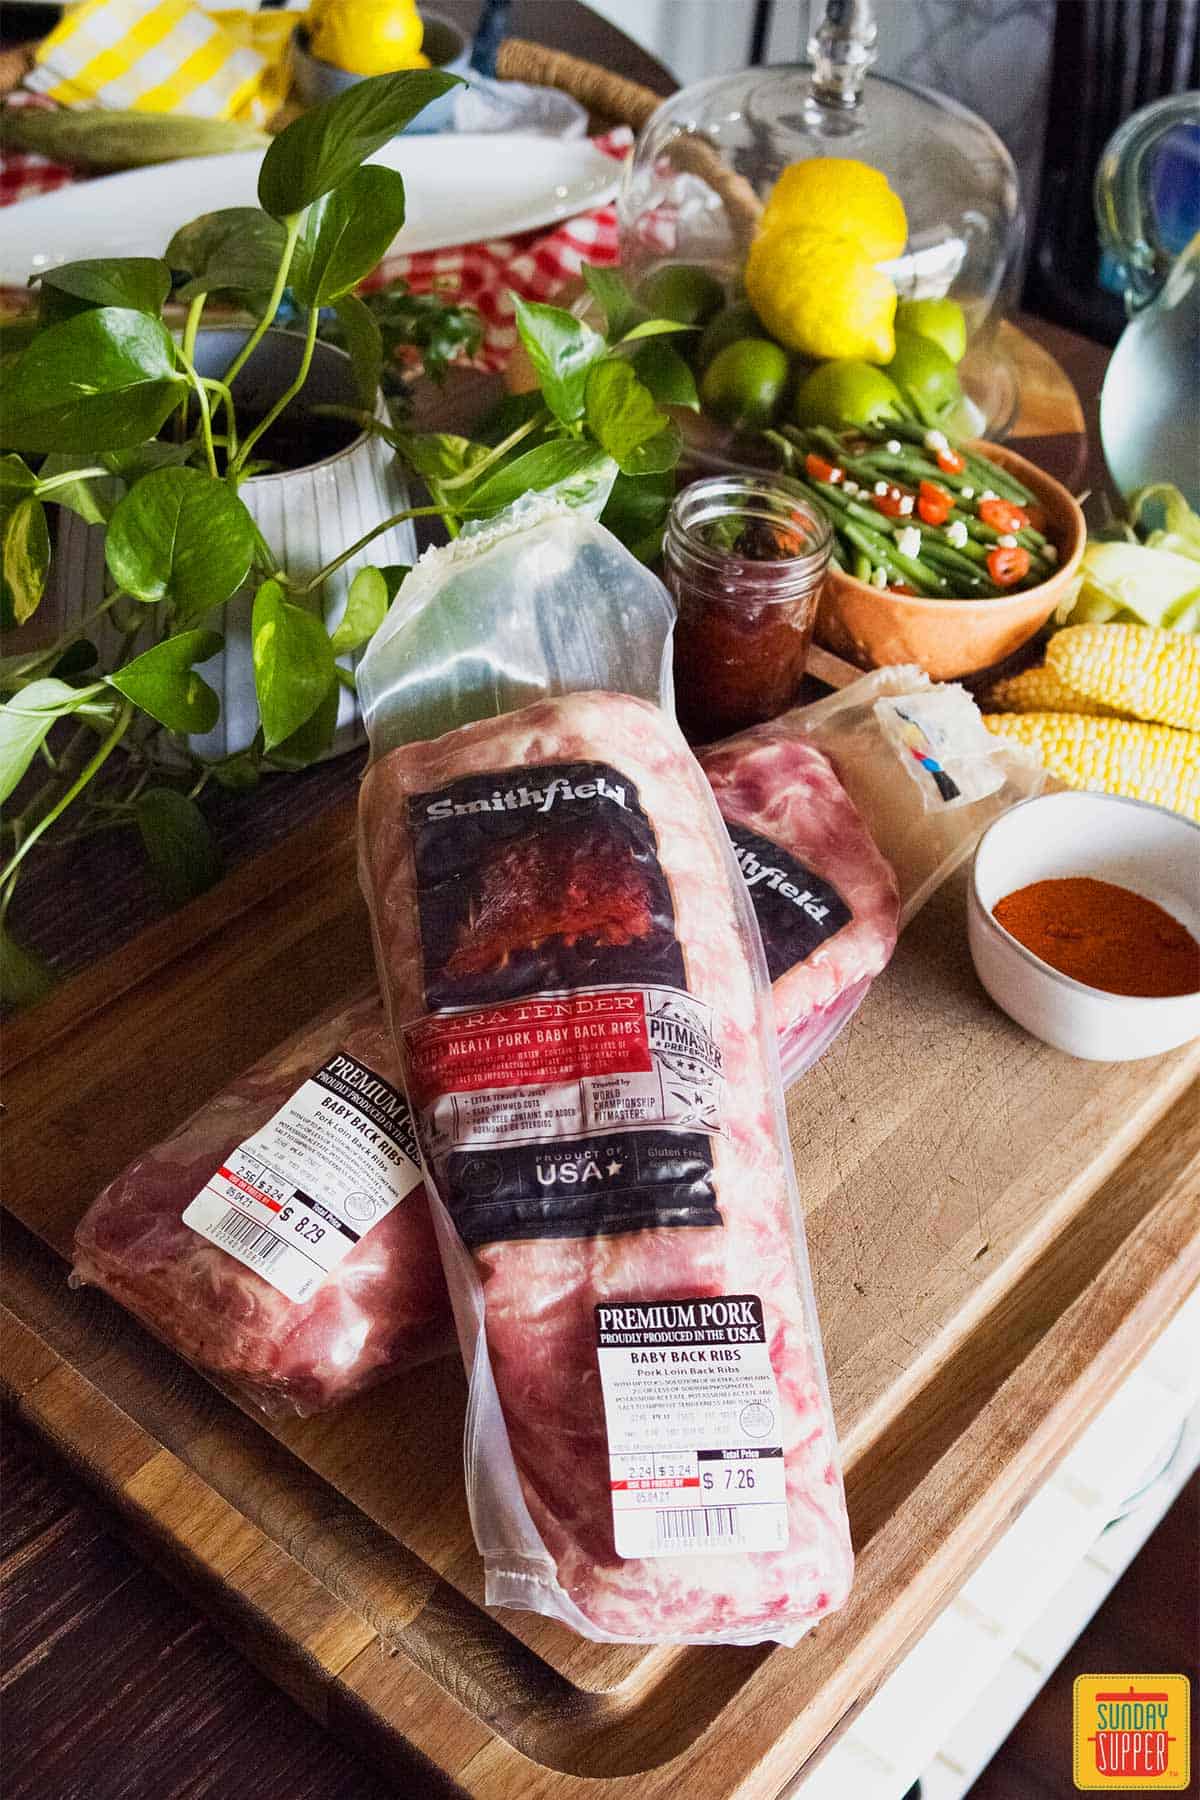 Smithfield baby back ribs in the package